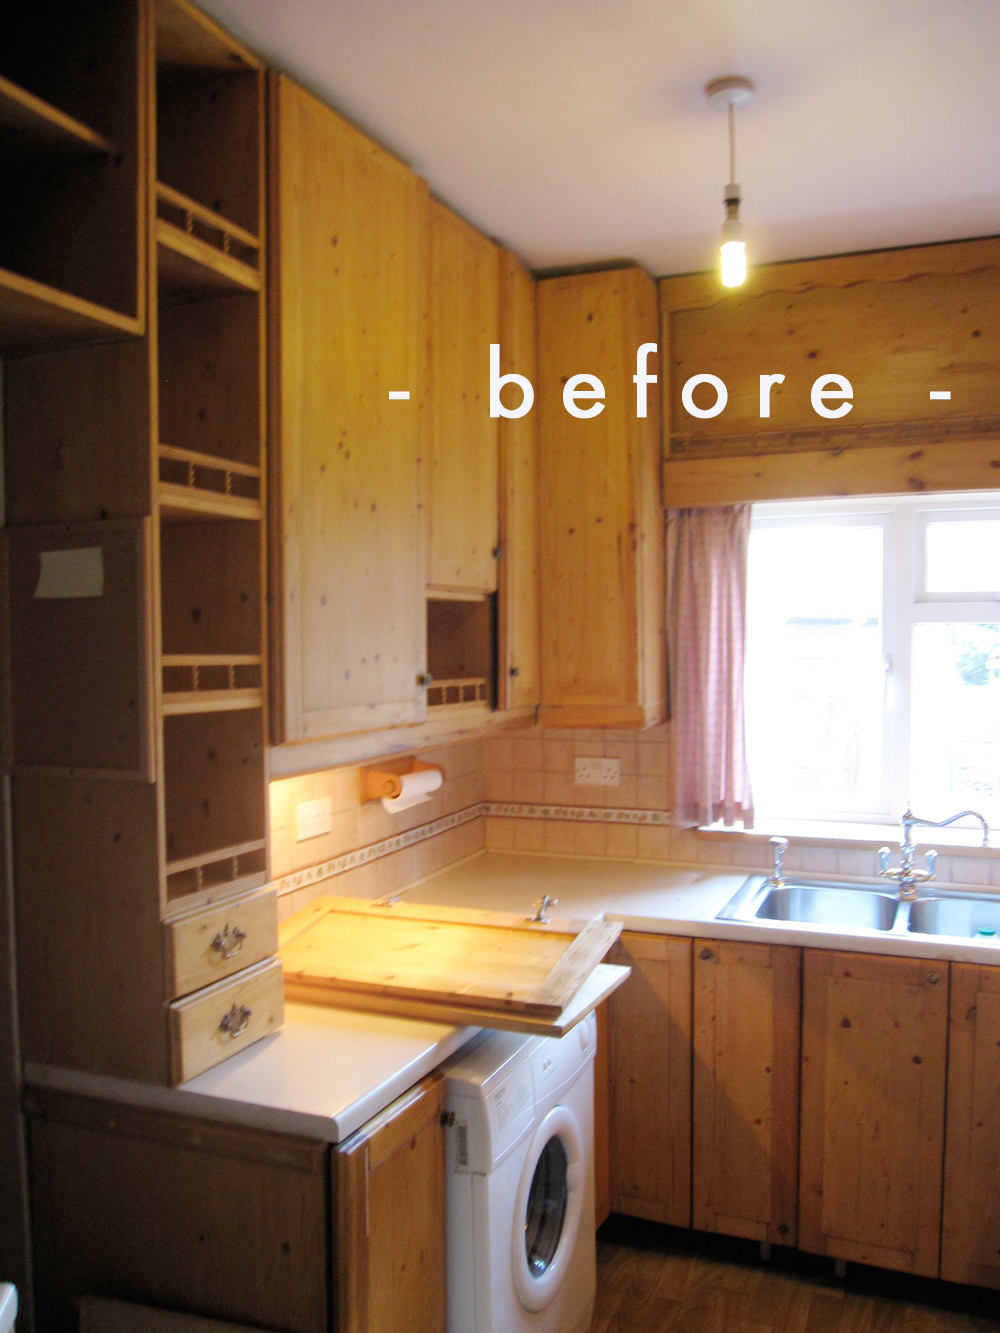 Story-of-a-kitchen-renovation-before